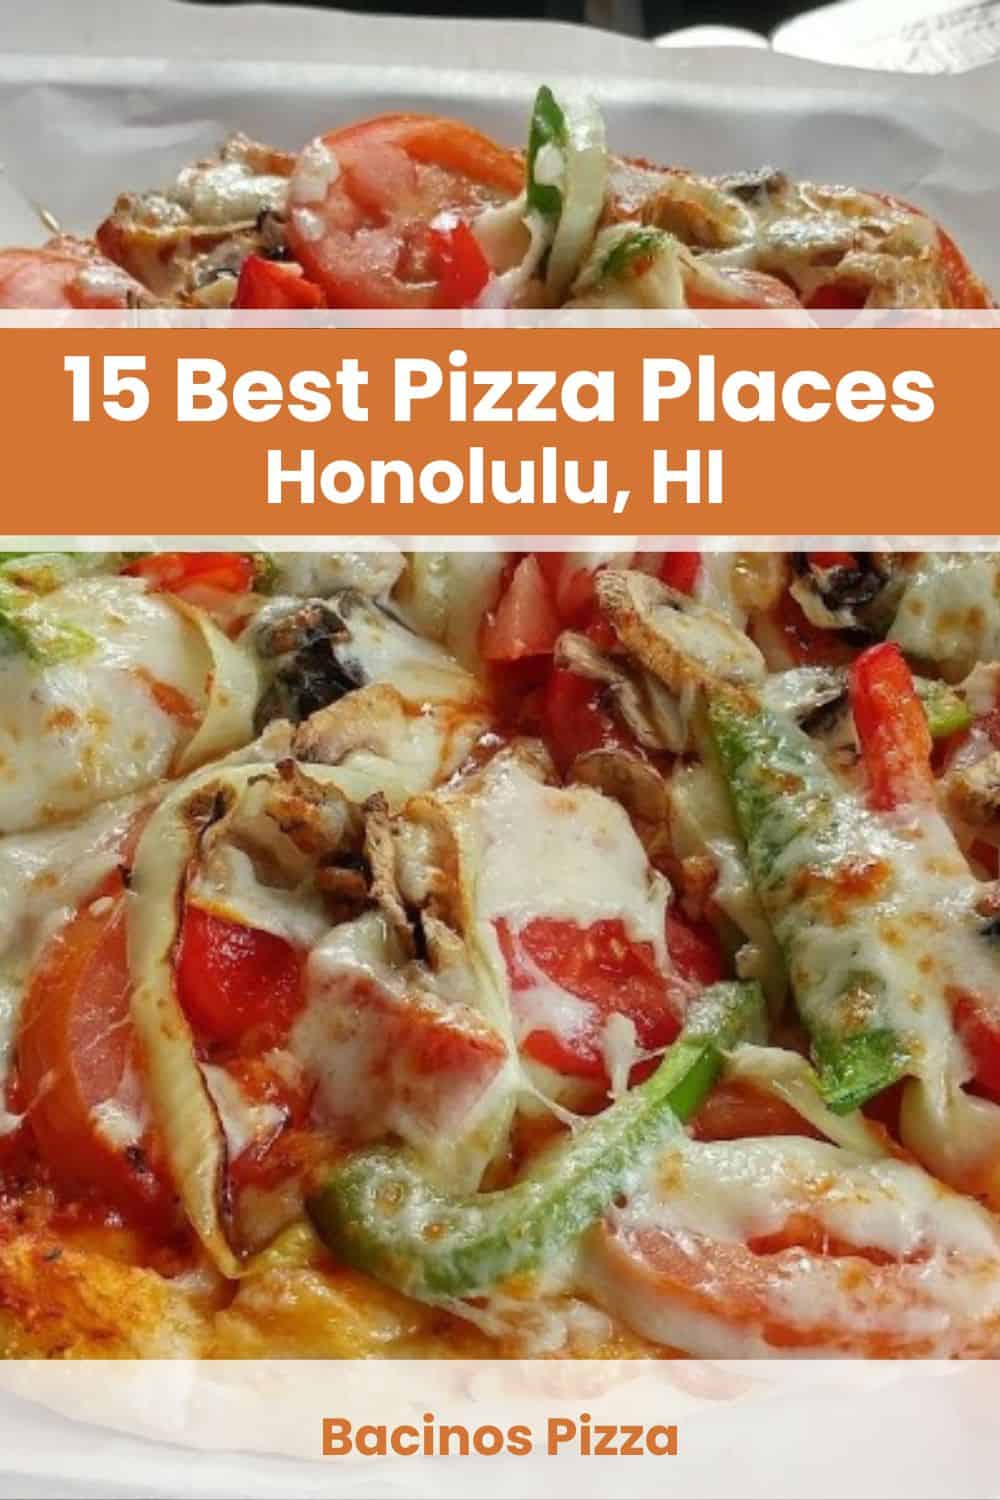 Best Pizza Places in Honolulu